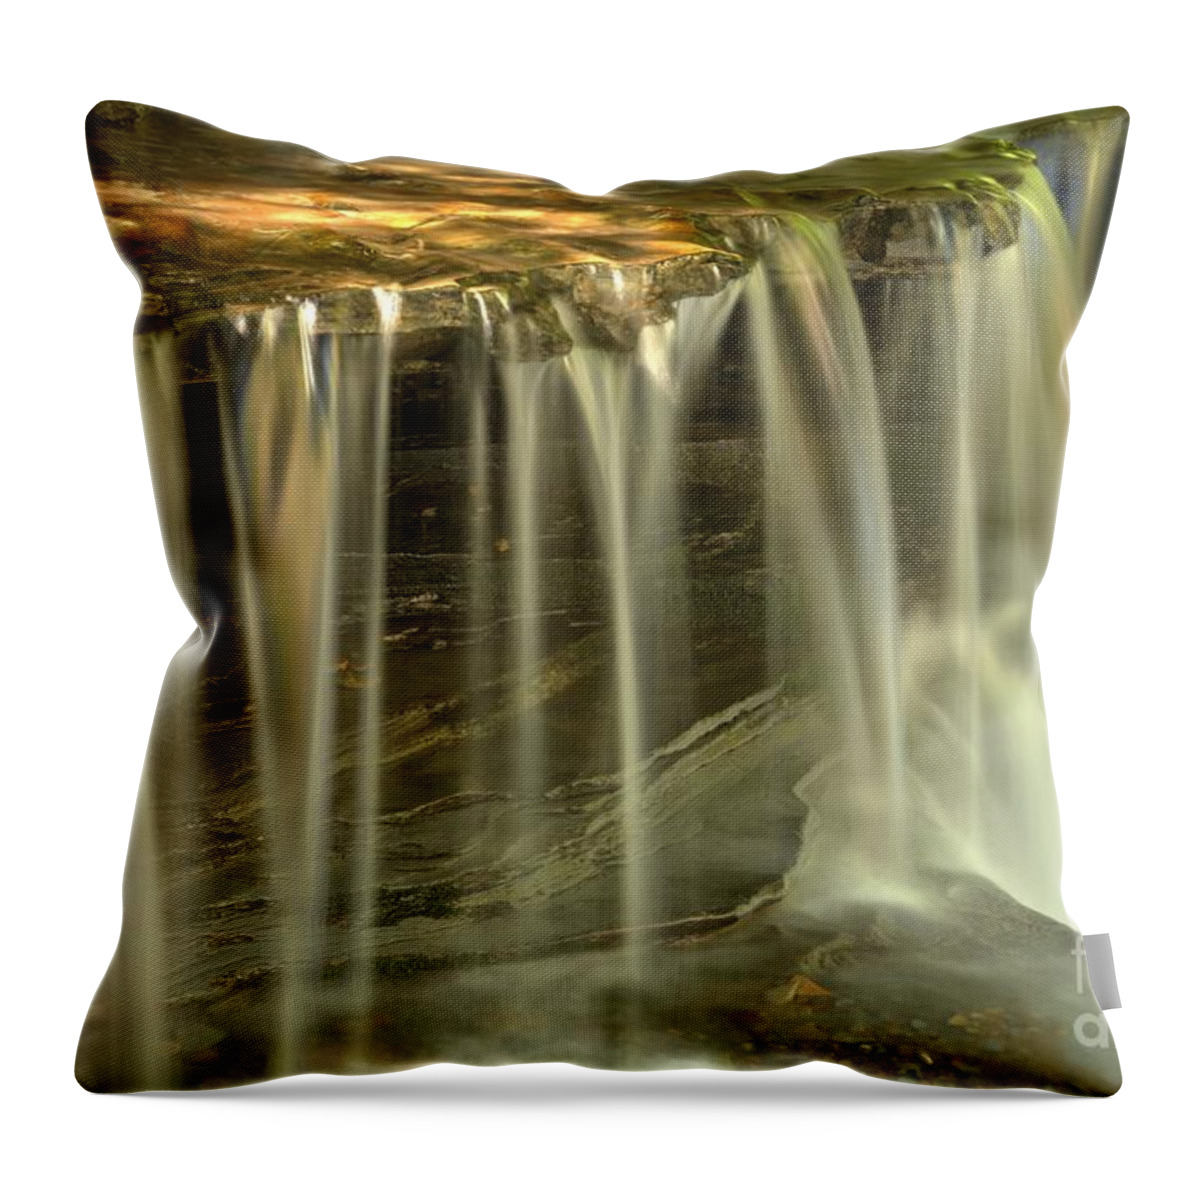 Stony Brook Waterfall Throw Pillow featuring the photograph Metallic Streams At Stony Brook by Adam Jewell